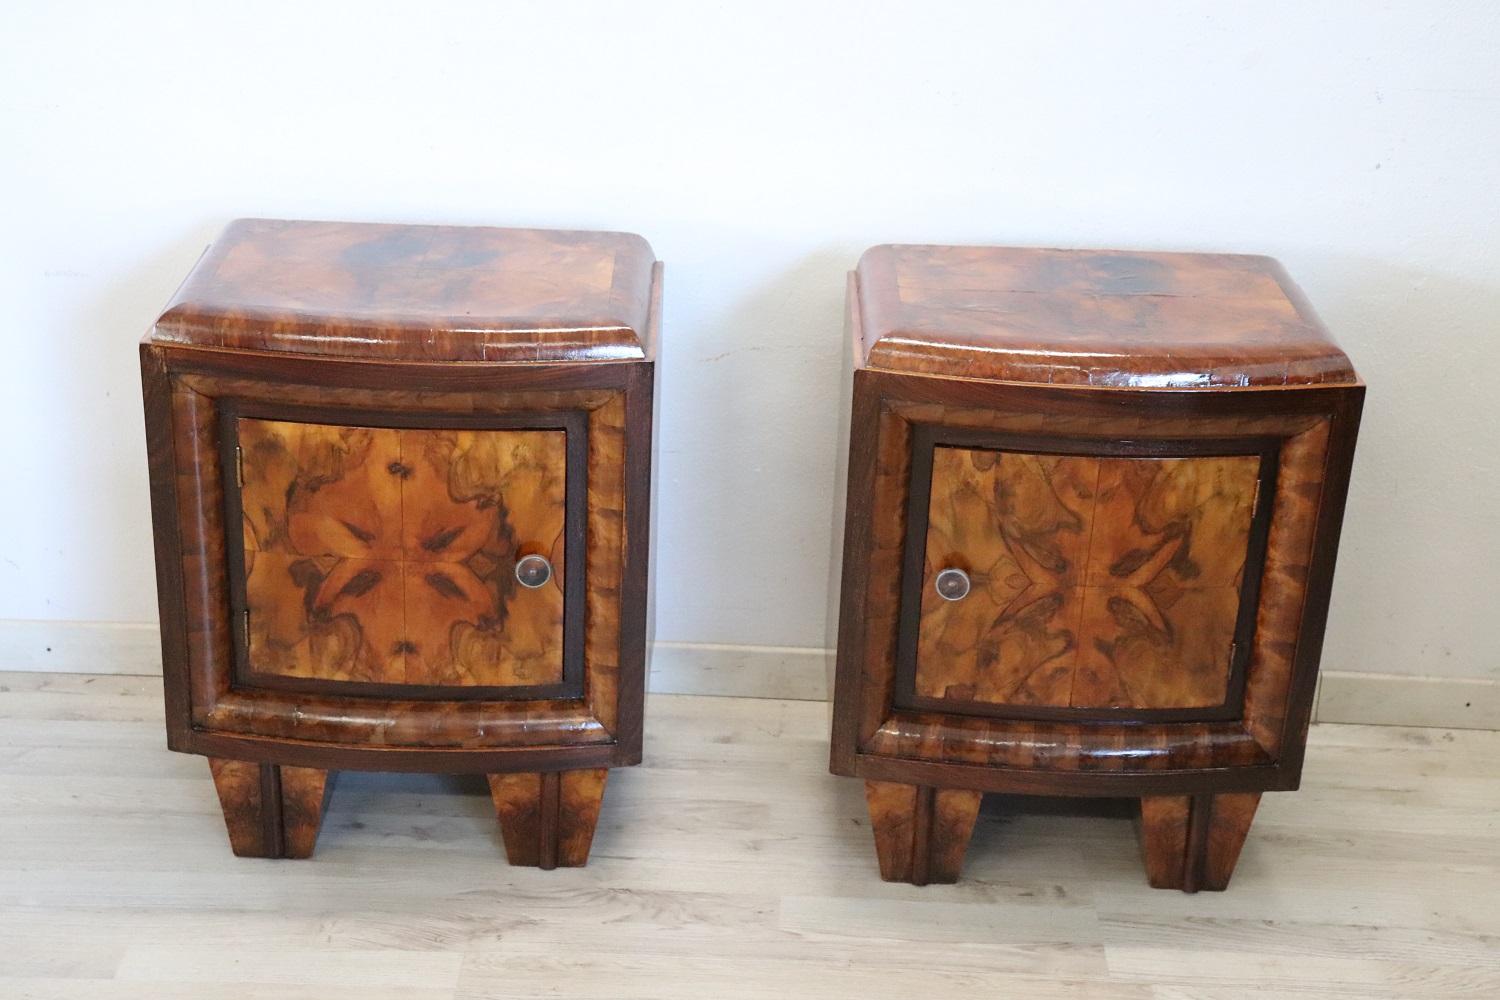 Rare and fine quality Italian Art Deco pair of nightstands, 1920s. The nightstands are in precious walnut briar.
Large useful space. Characterized by a simple line with rounded profiles typical of the Art Deco period. Perfect for a modern bedroom.